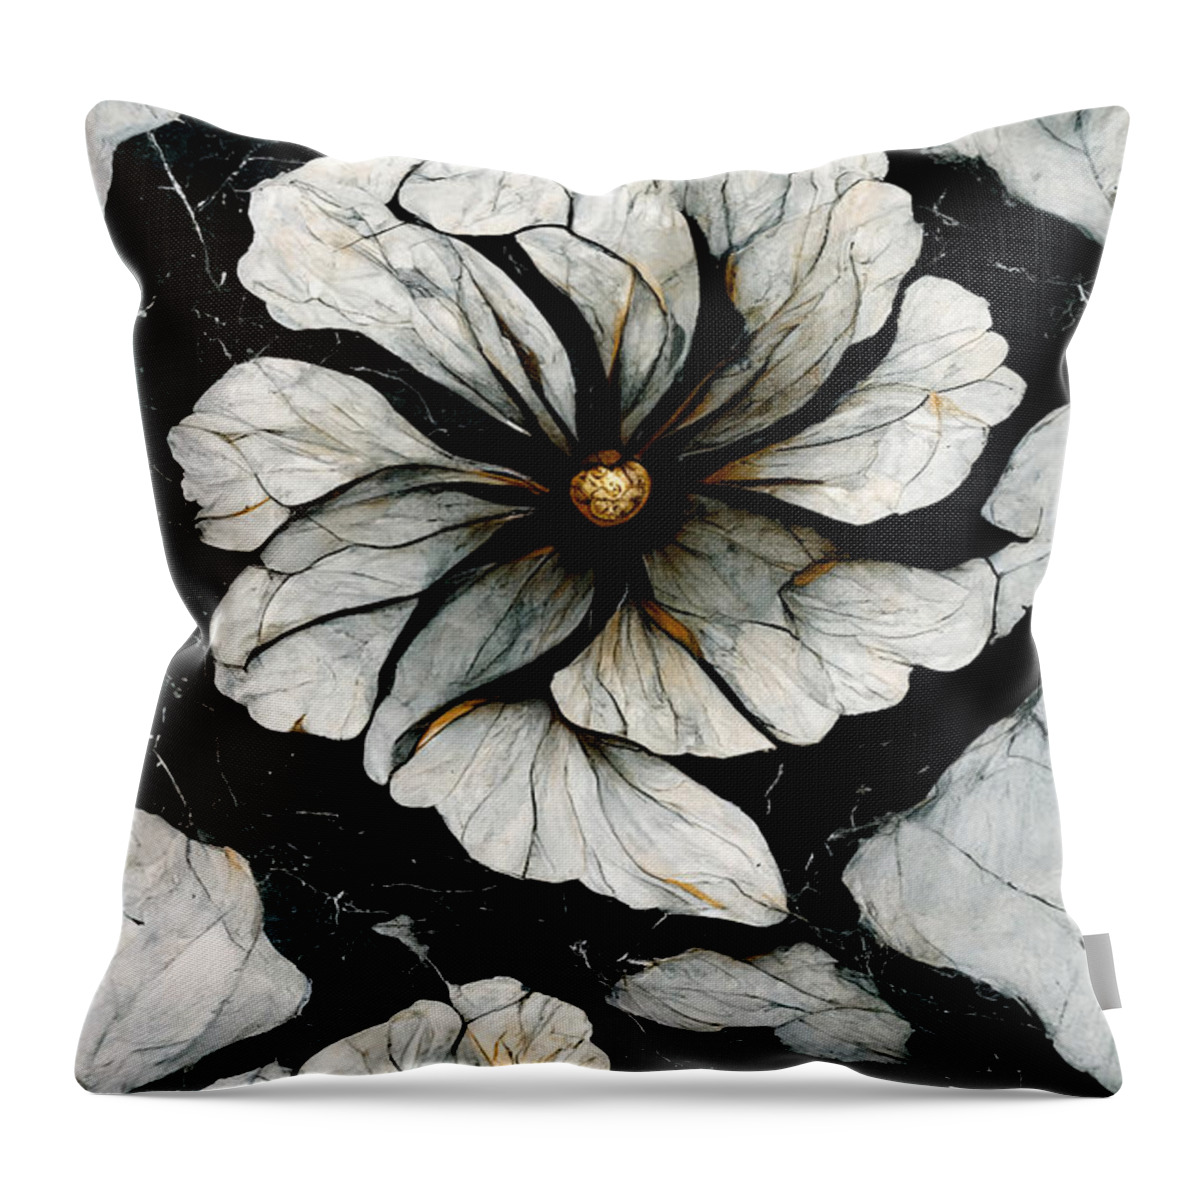 Marble Throw Pillow featuring the digital art Black Marble Flowers #4 by Andreas Thaler